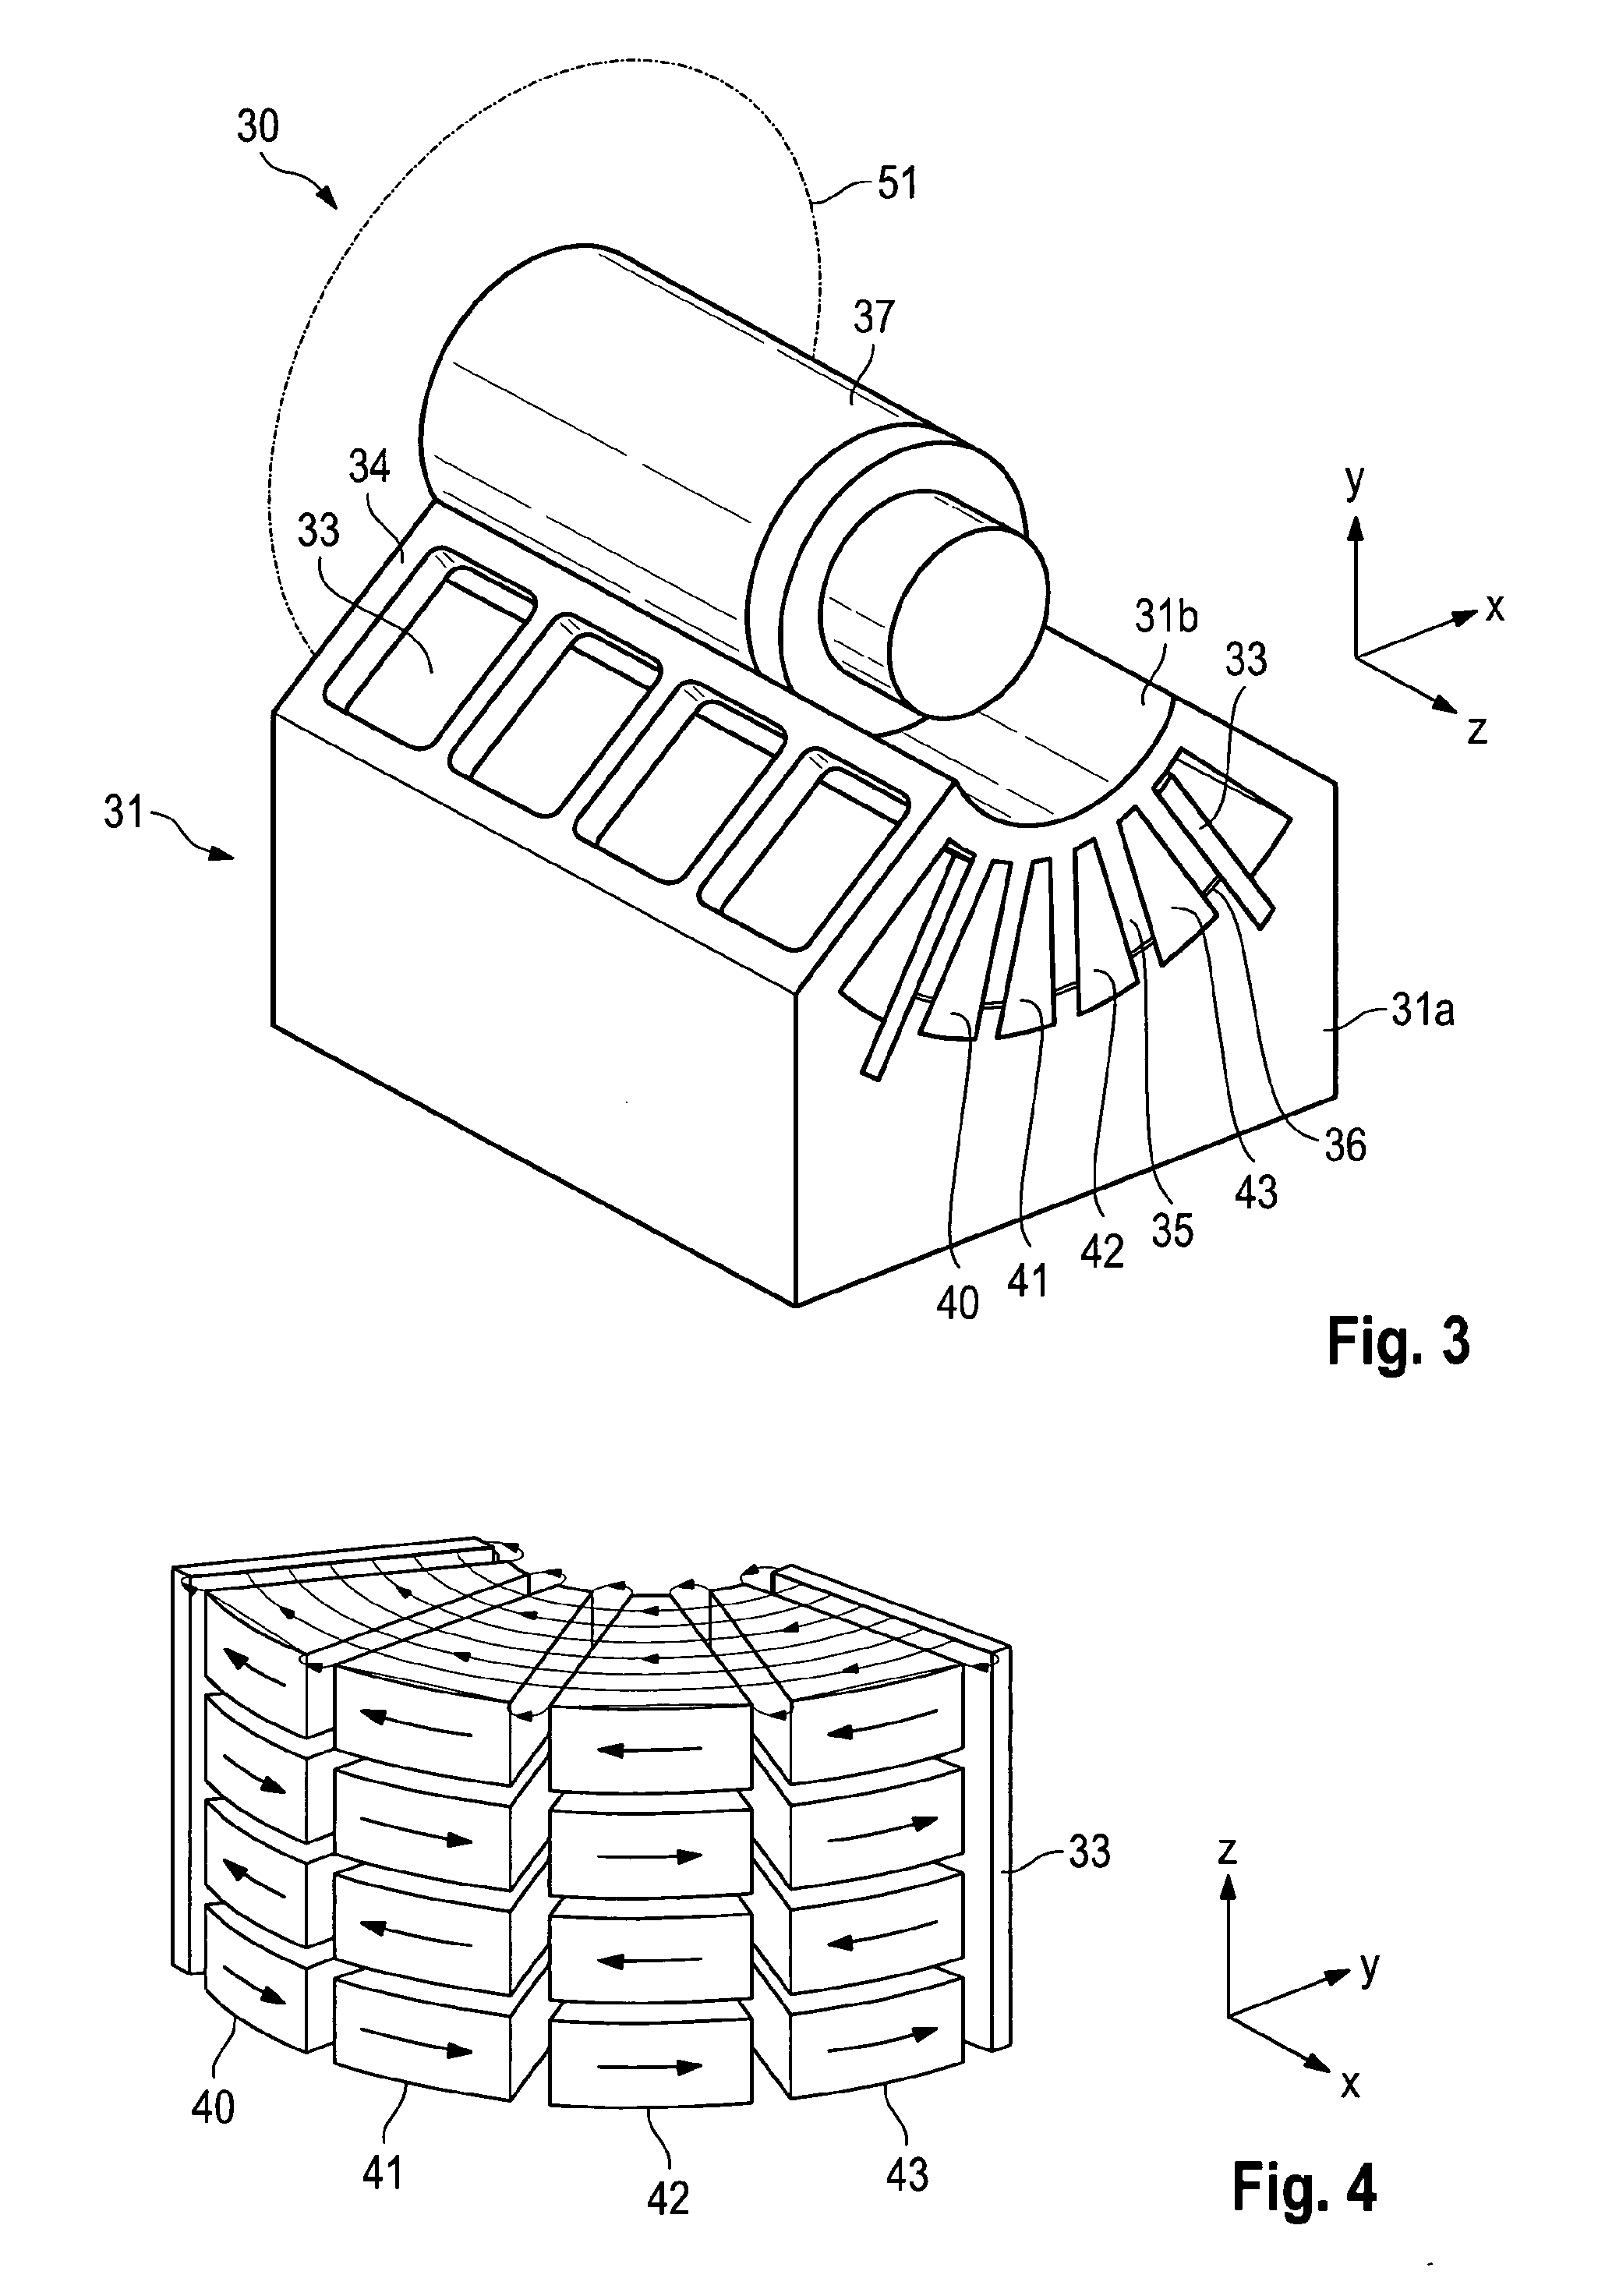 Lithography device with eddy-current brake